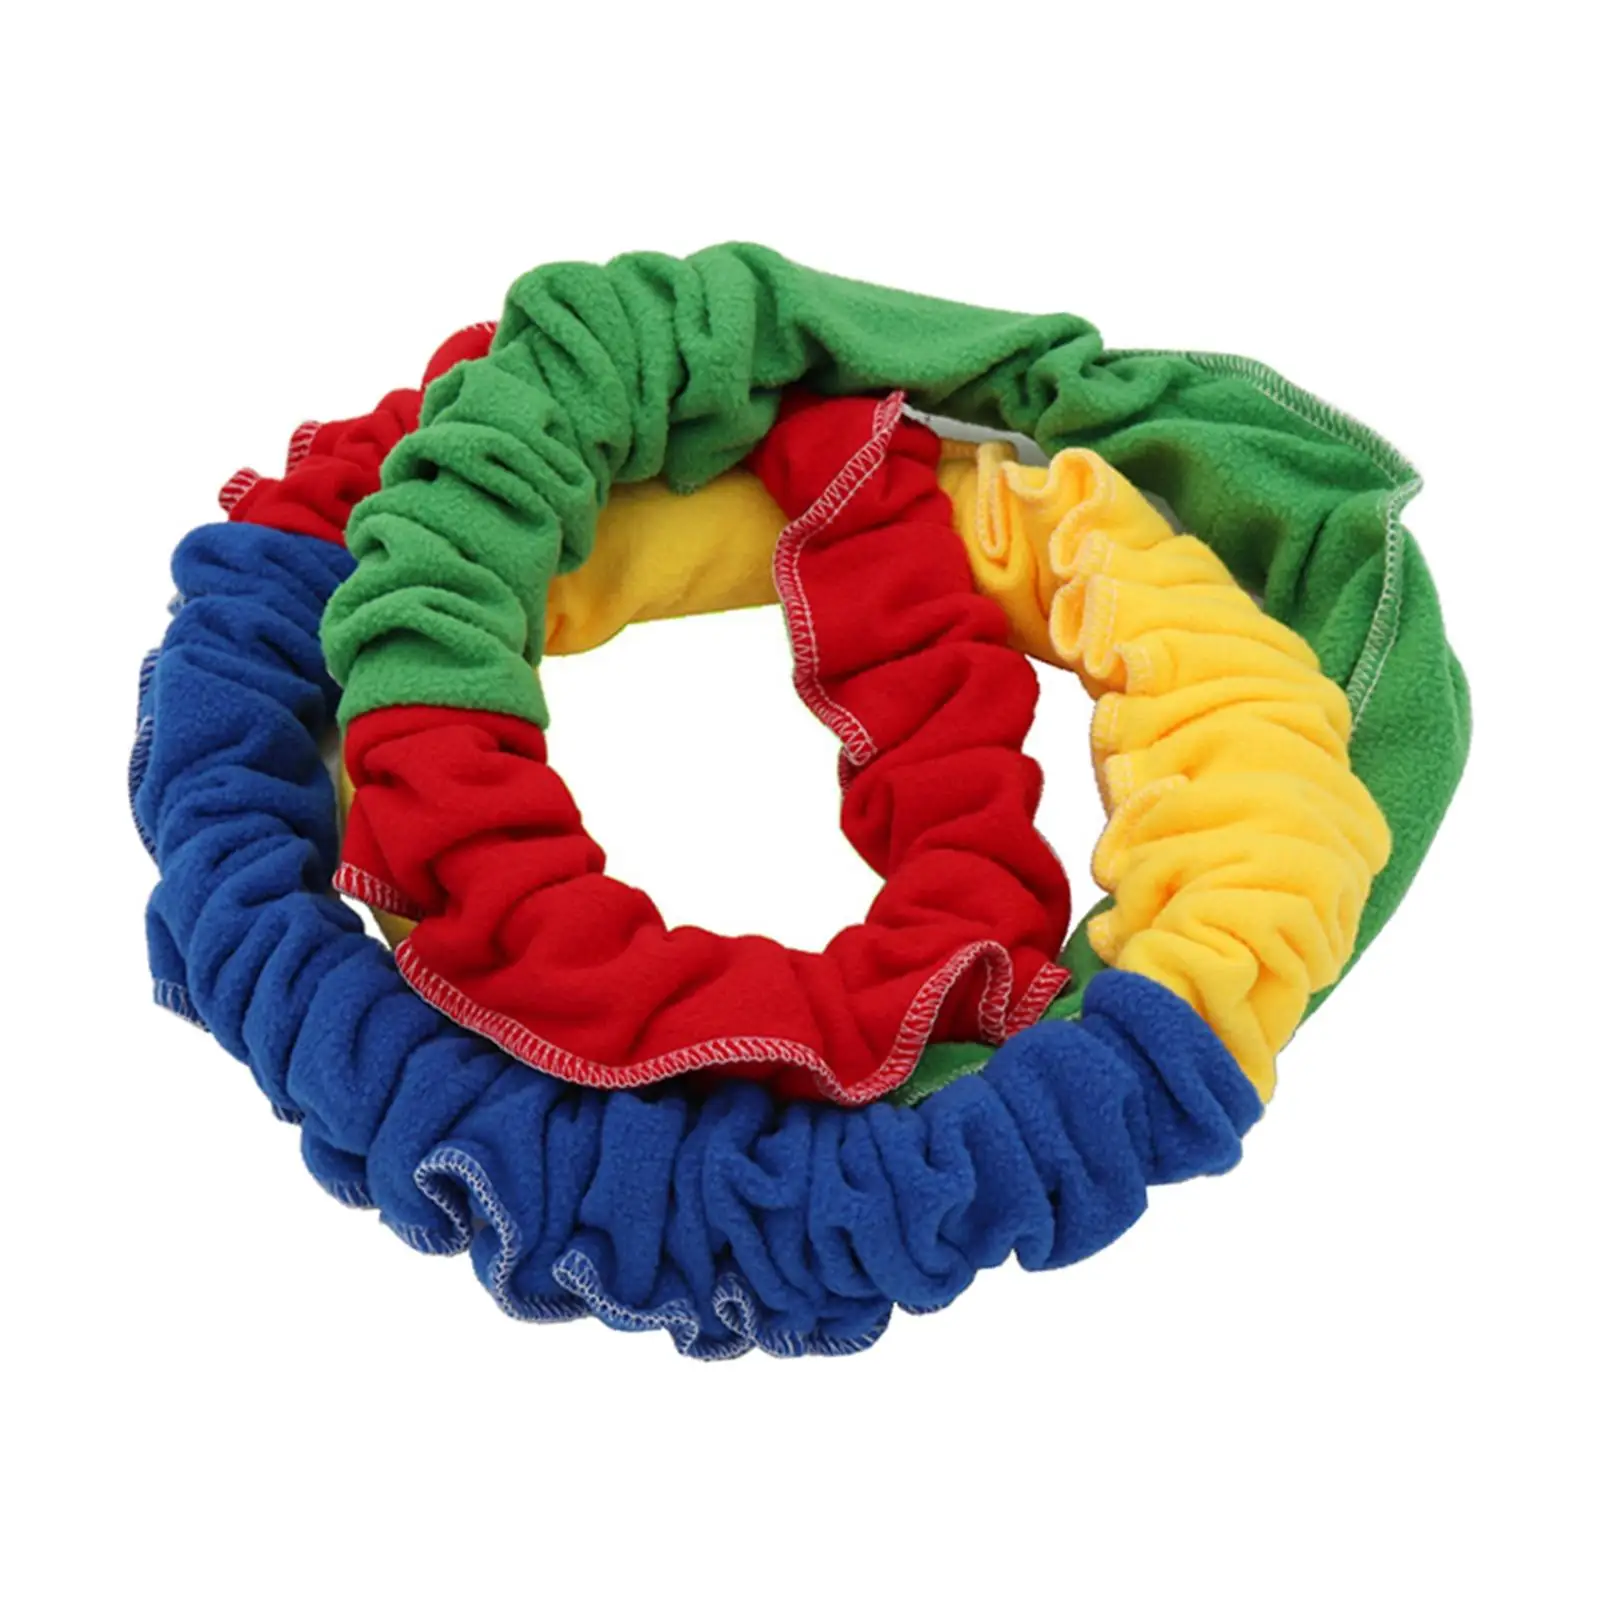 1 Pcs Elastic Fleece Cooperative Stretchy Band Groupwork Play Dynamic Movement Exercise Prop for Playground Activities Child